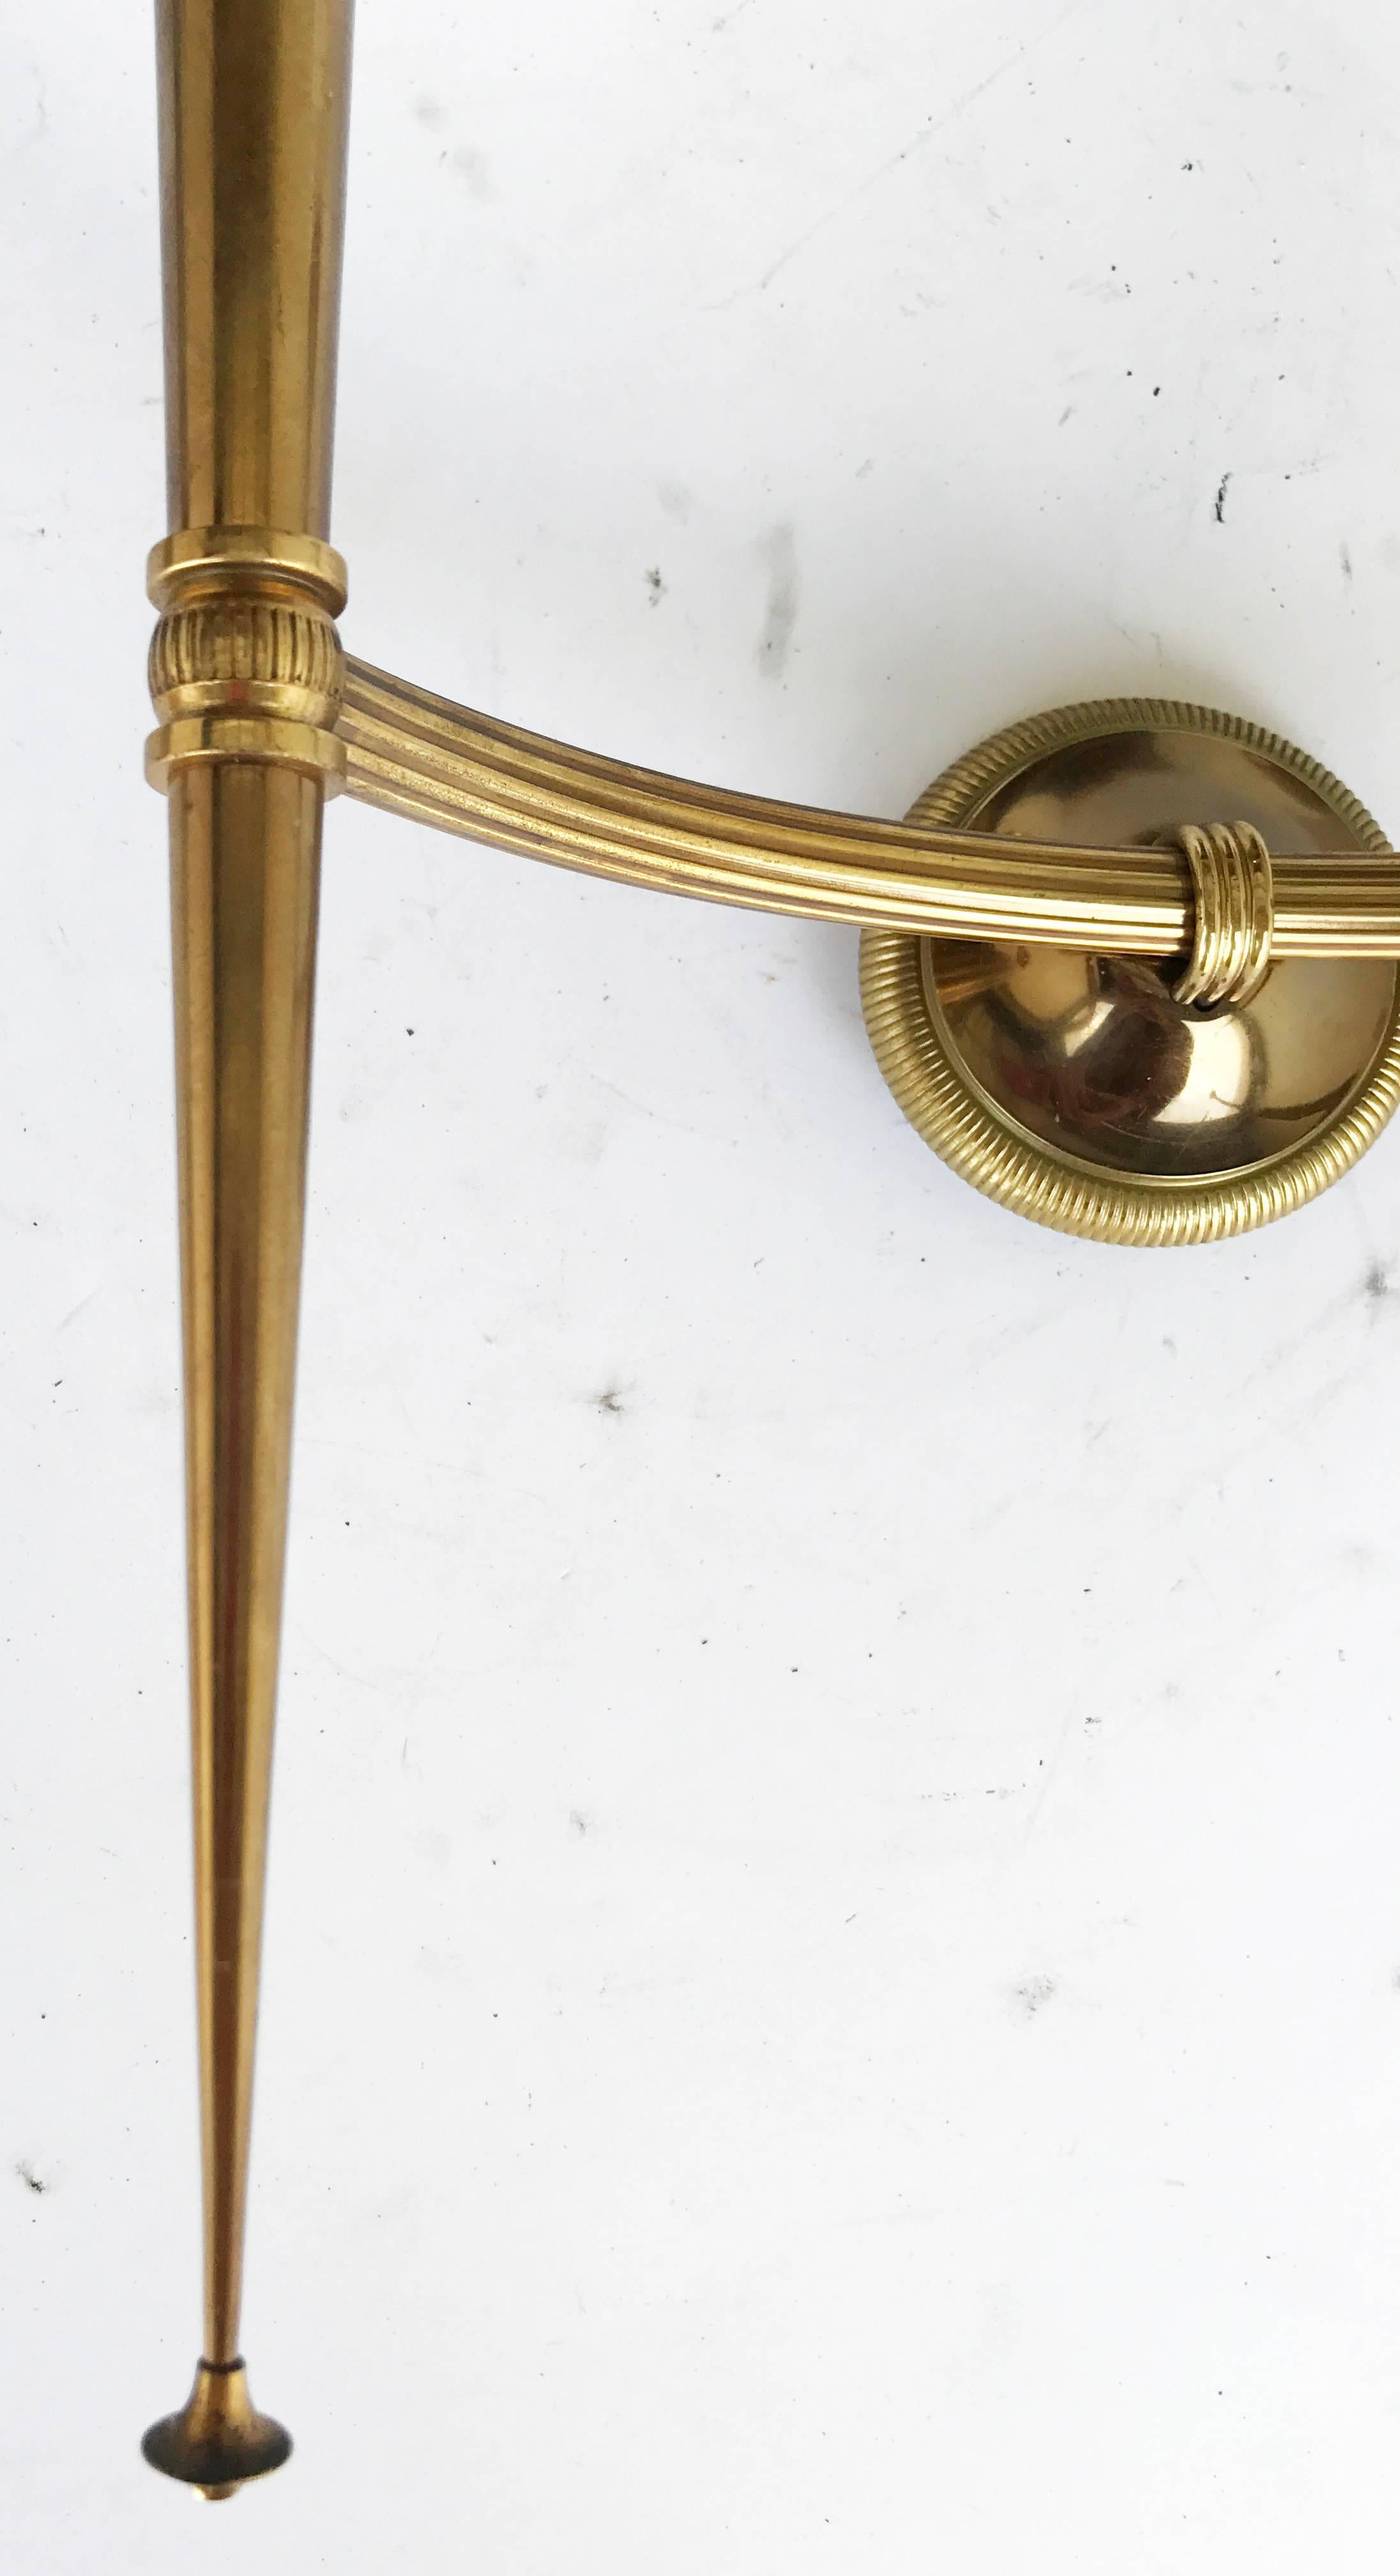 Superb pair of two arms sconces, probably retailed by Maison Jansen, circa 1970, two patina bronze and brass, opaline glass ball, 5 inches diameter
Two lights, 40 watts max bulb
US rewired and in working condition
Backplate diameter 2 3/4